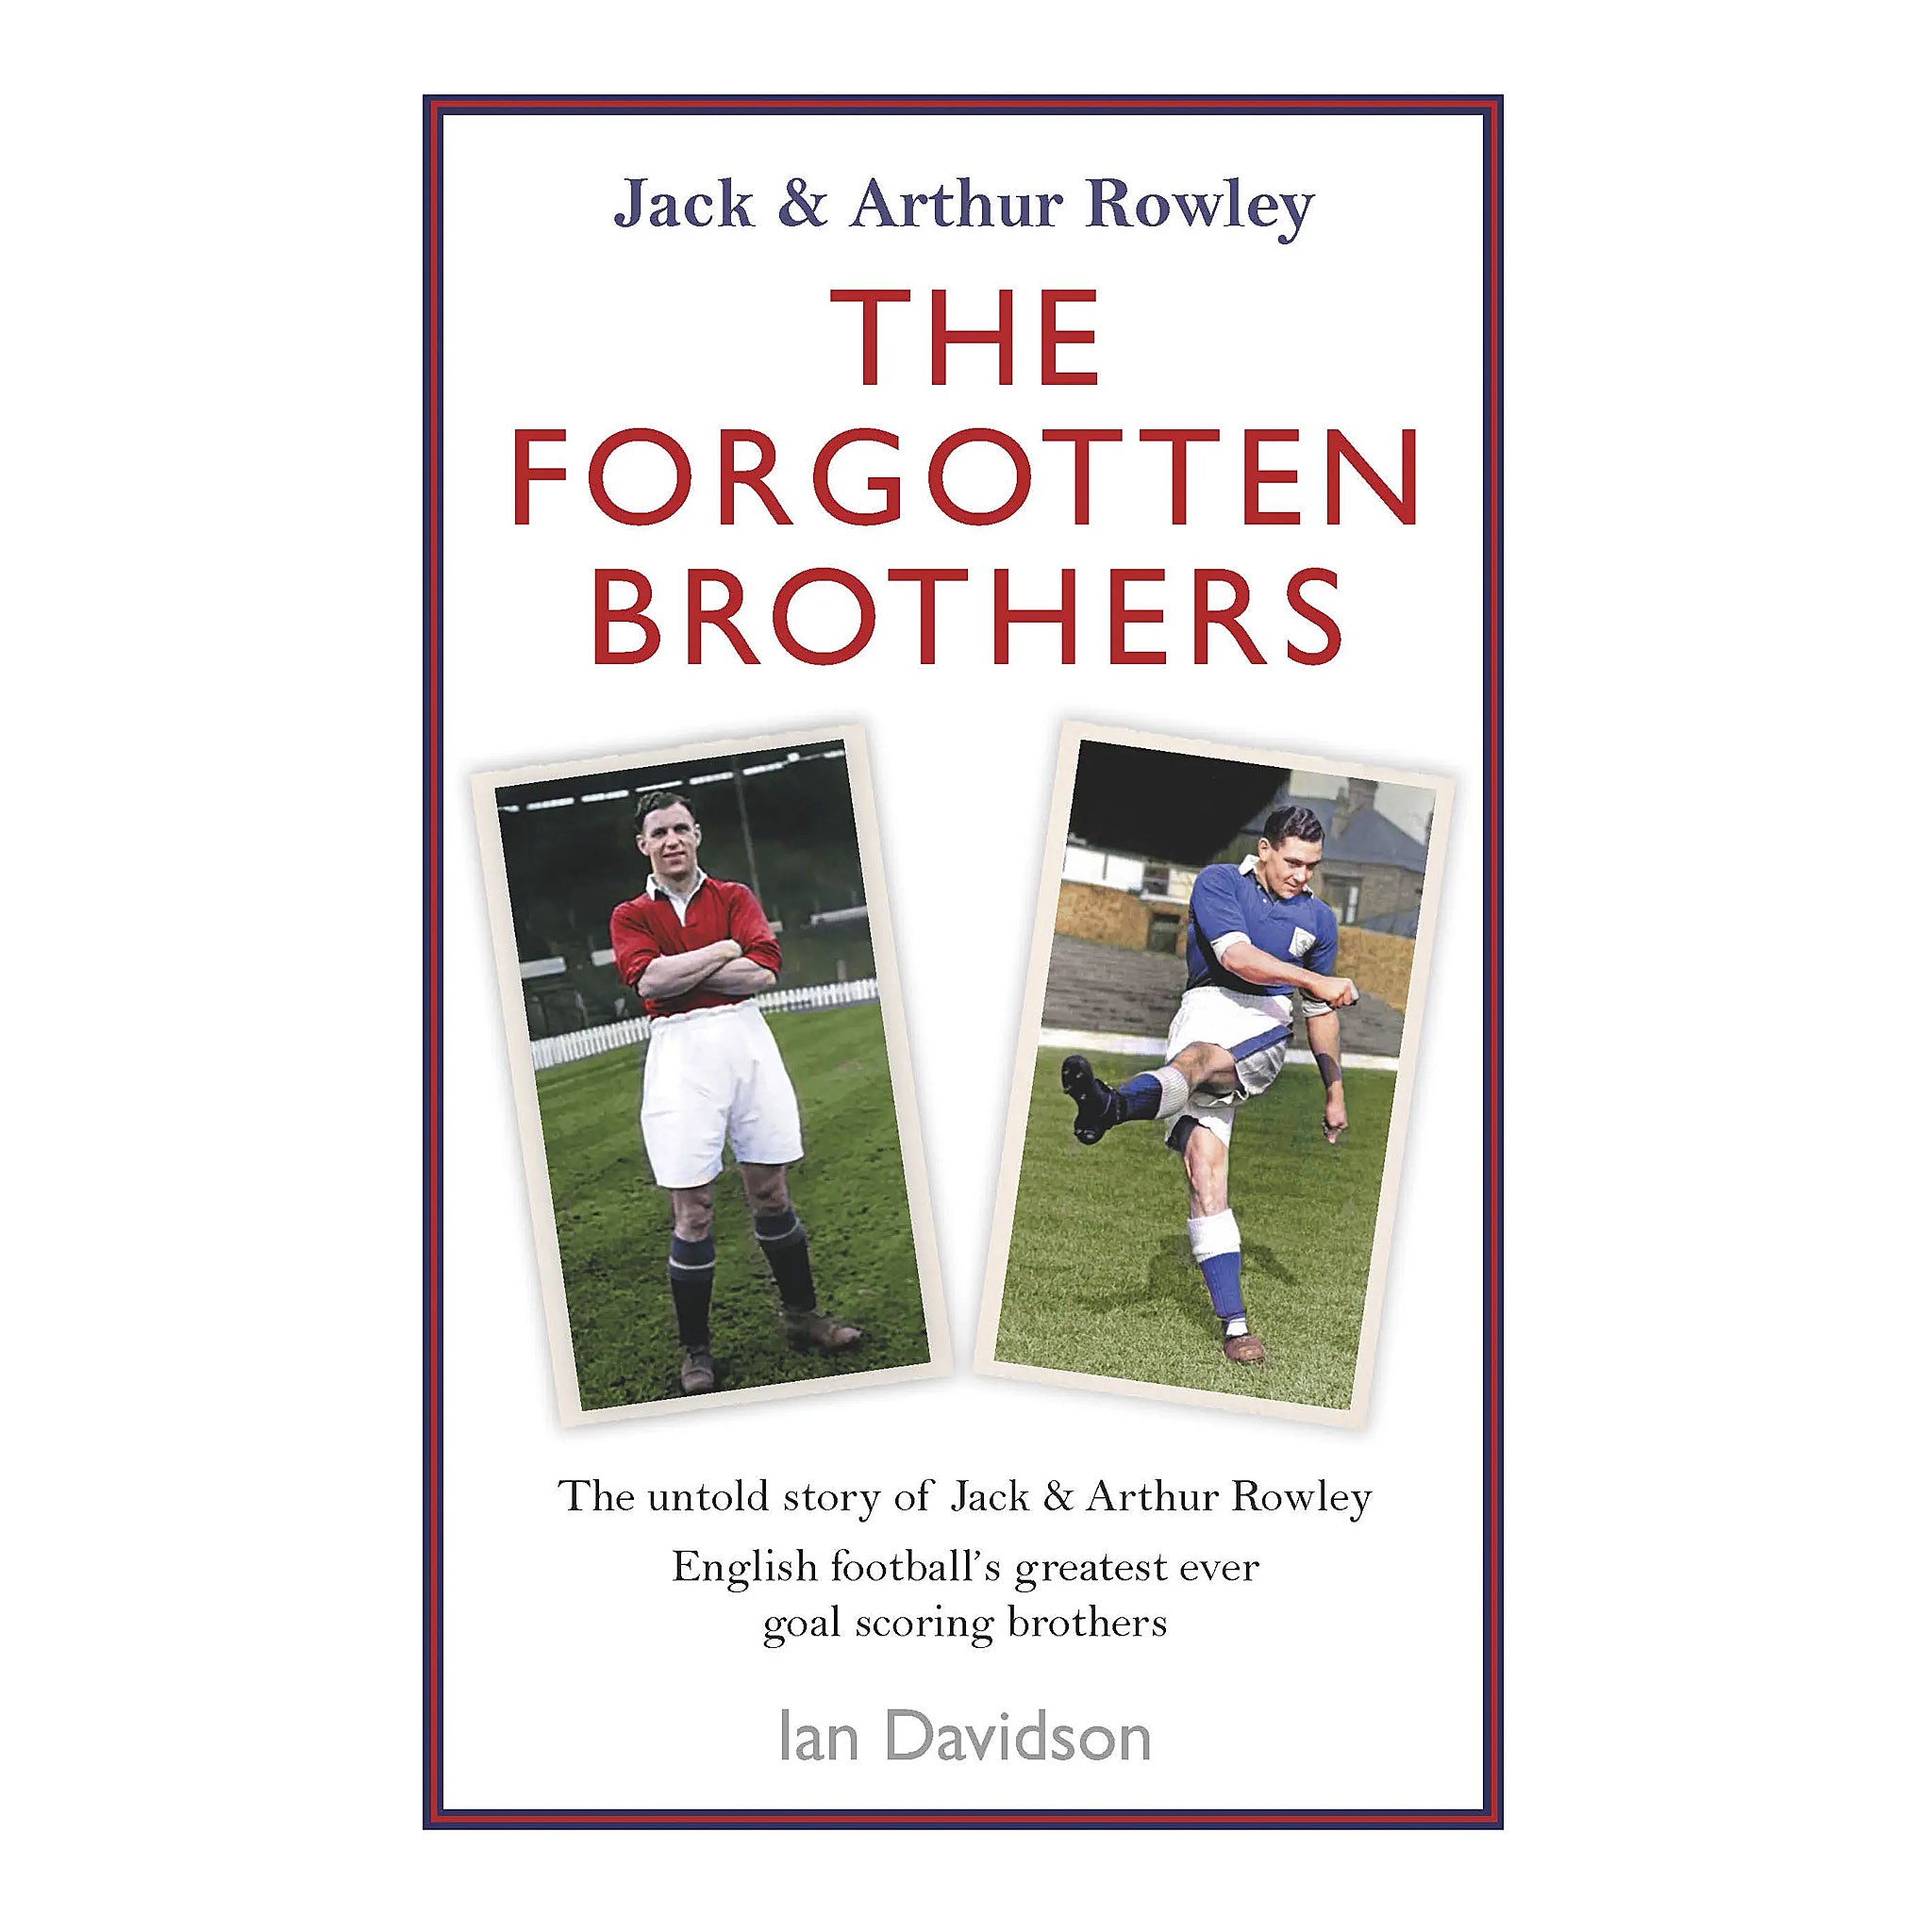 The Forgotten Brothers – The untold story of Jack & Arthur Rowley